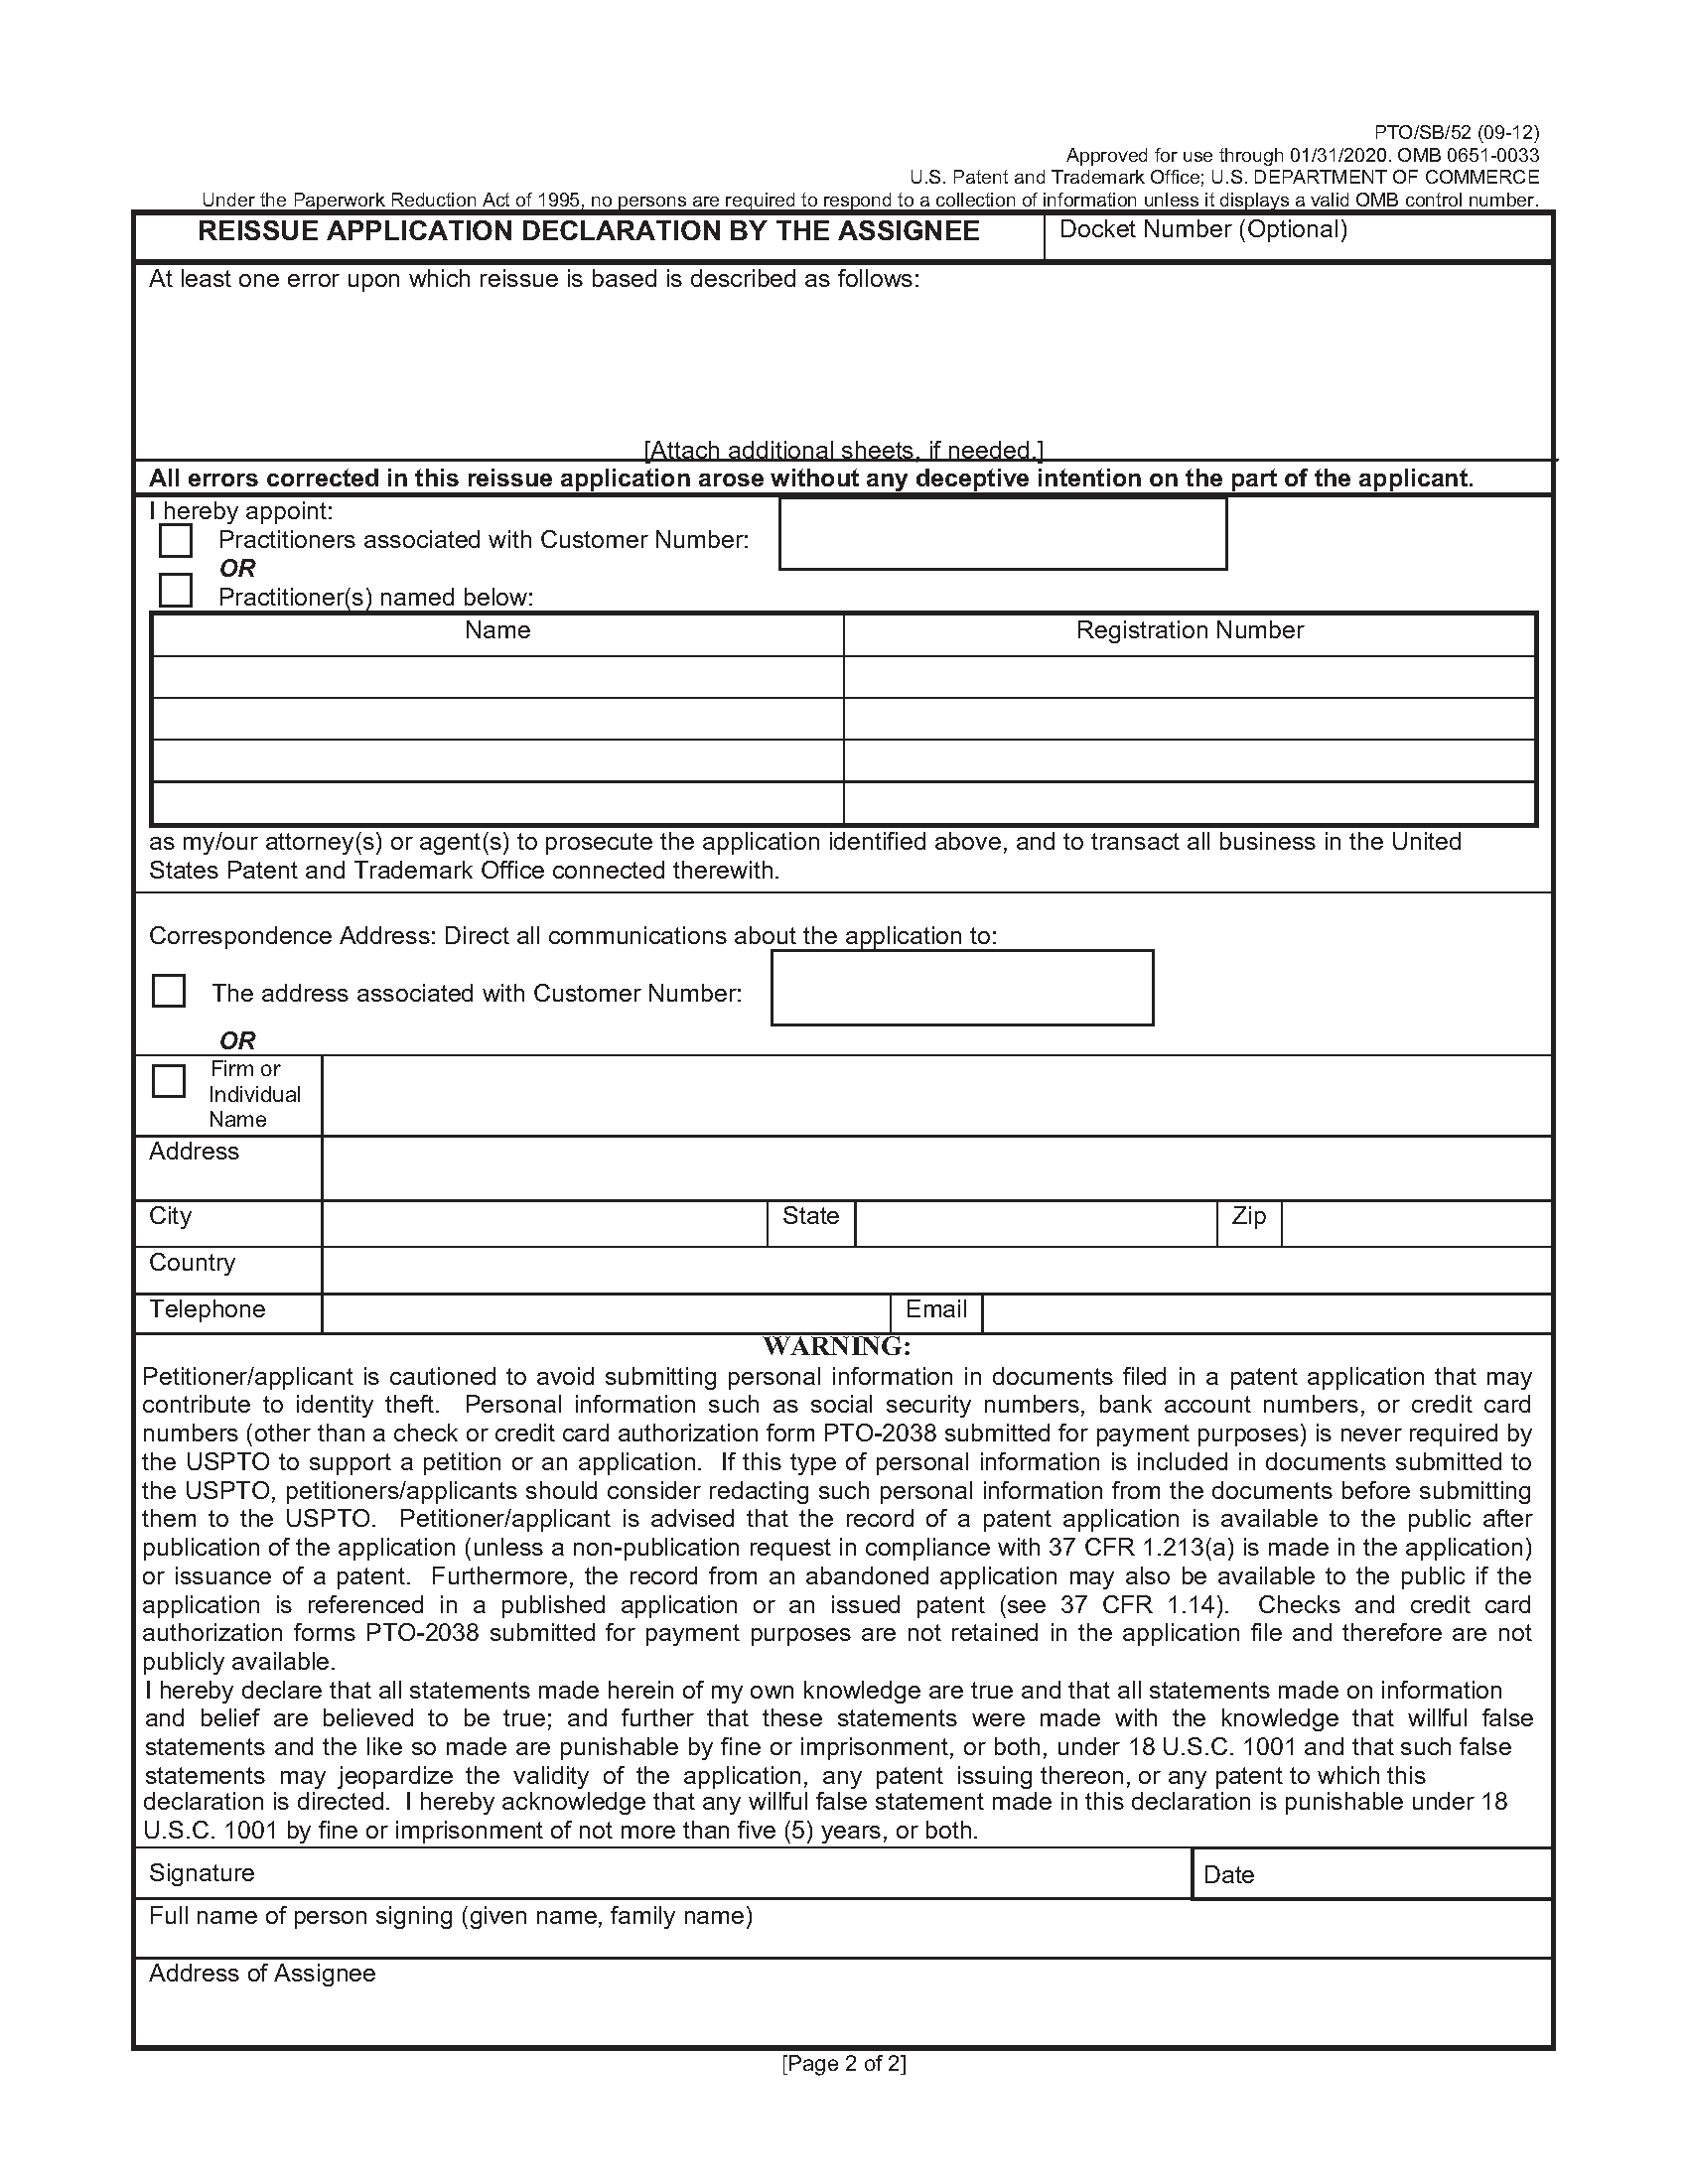 Reissue Application Declaration by the Assignee Page 2